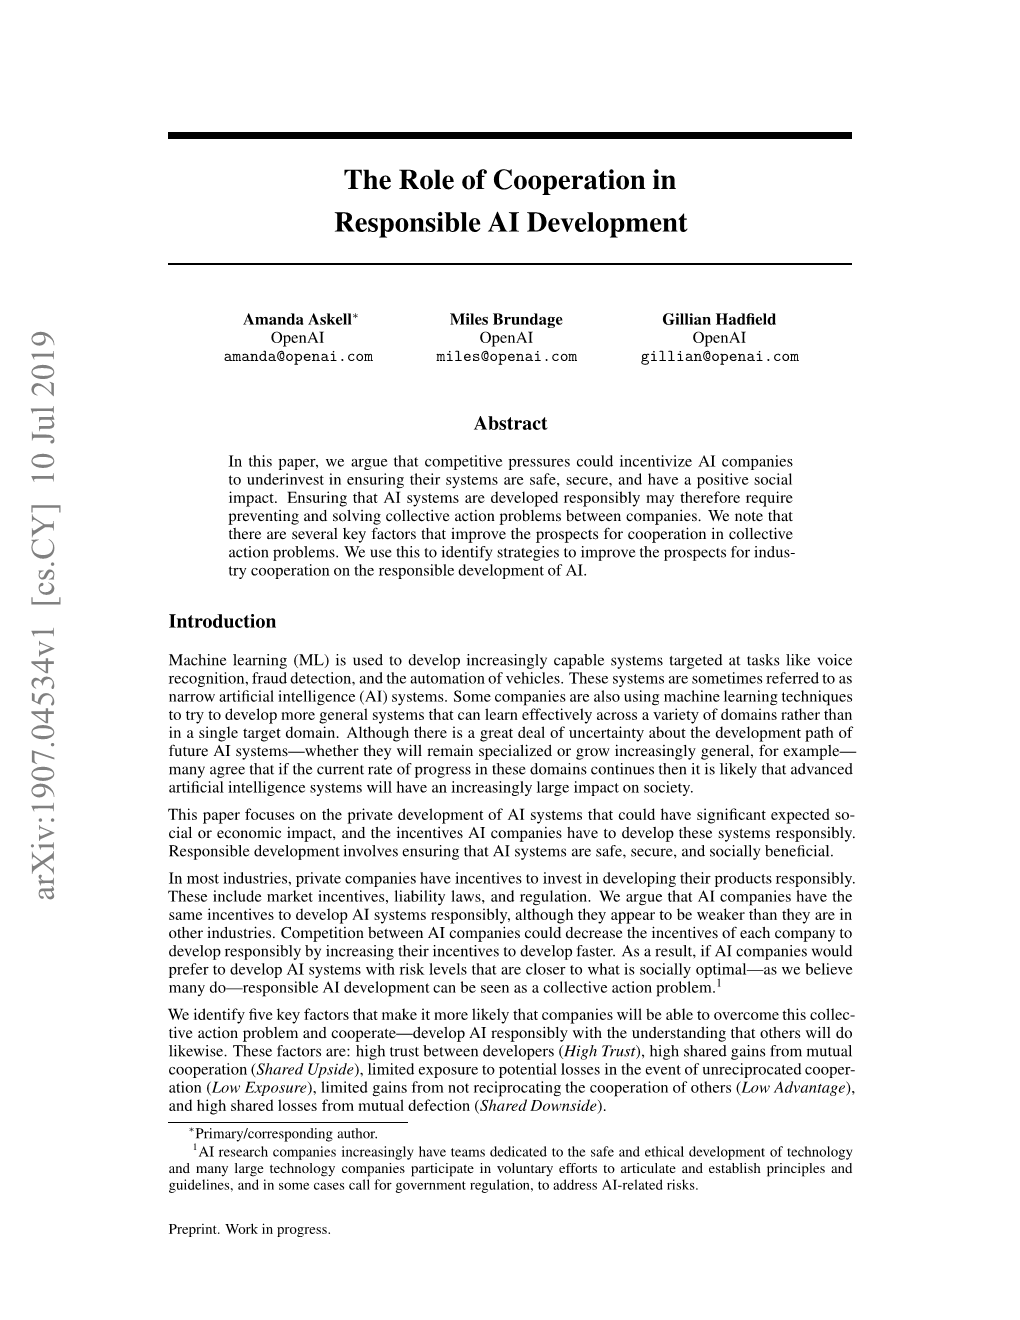 The Role of Cooperation in Responsible AI Development